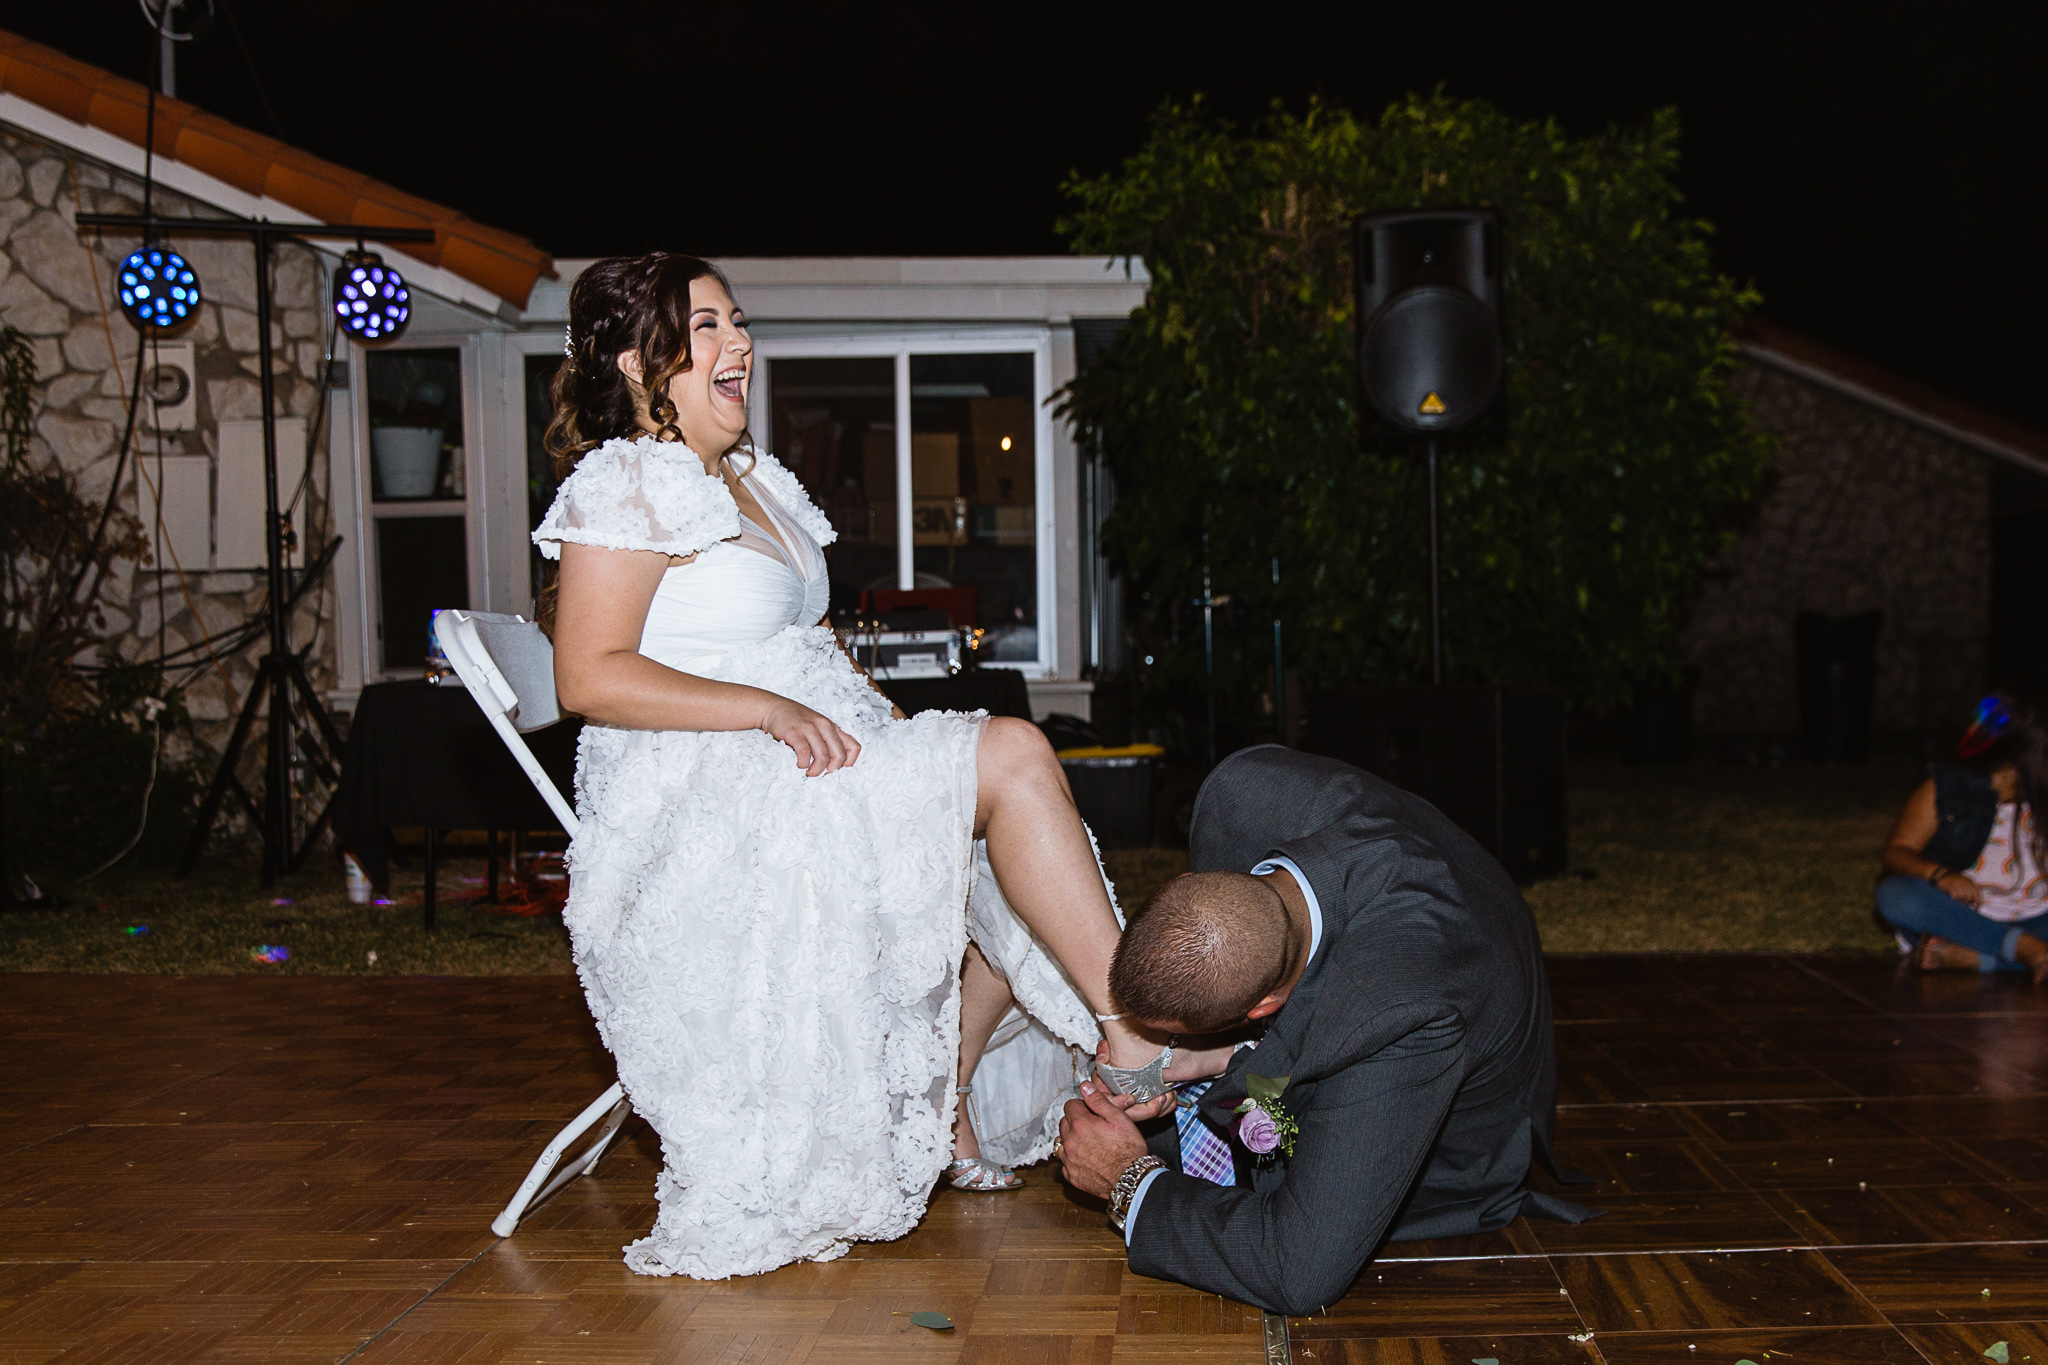 Bride laughs as groom goes under her dress to get the garter by PMA Photography.